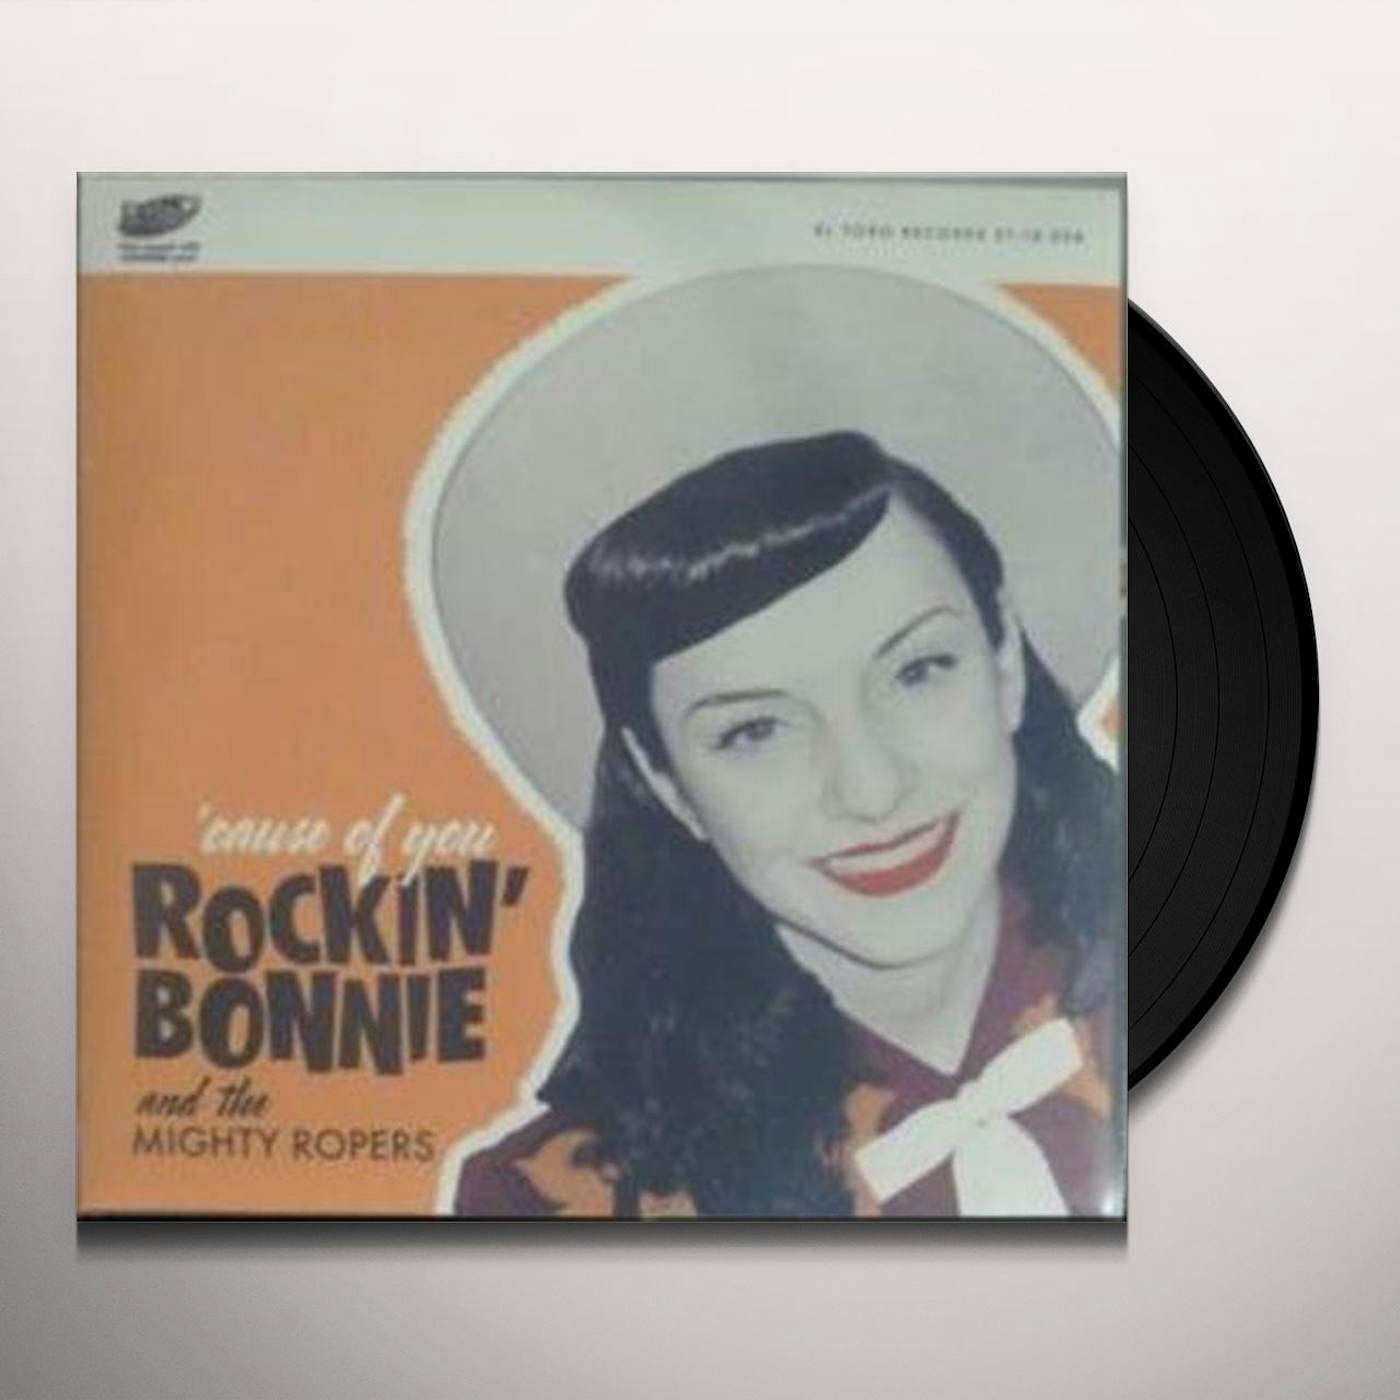 Rockin' Bonnie and the Mighty Ropers CAUSE OF YOU Vinyl Record